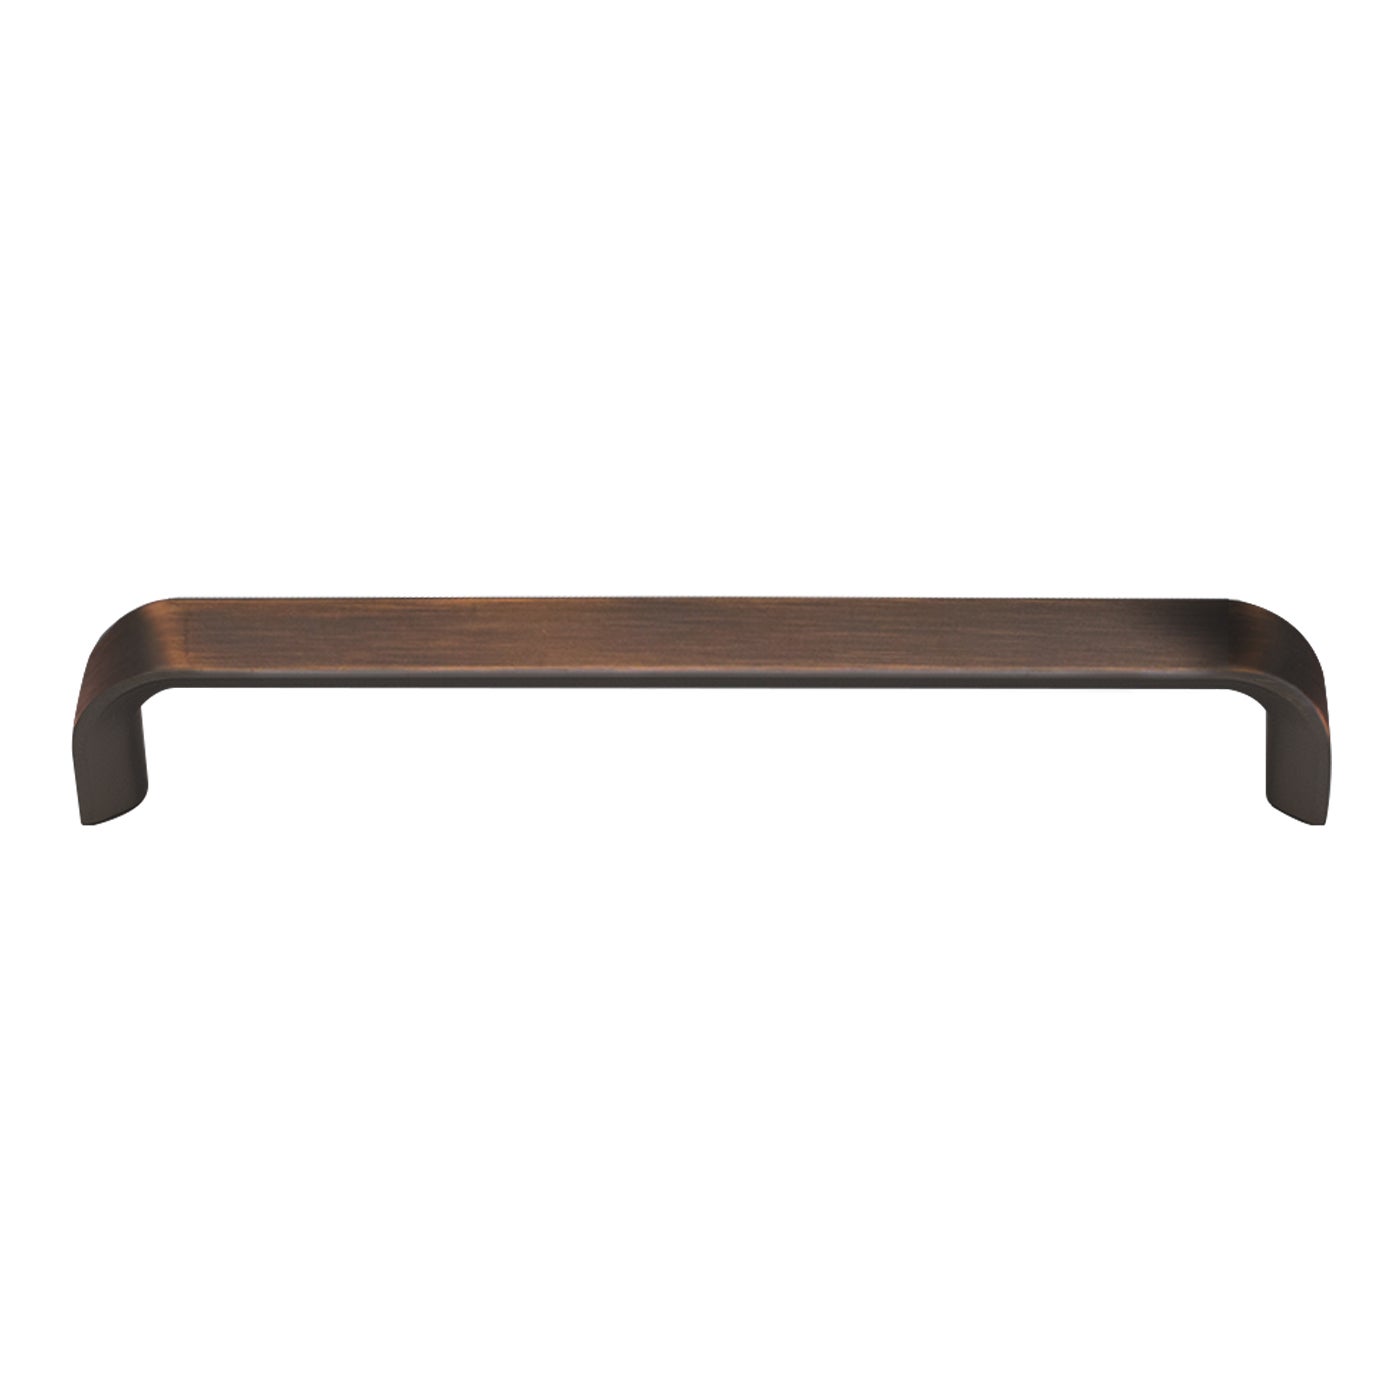 Kethy Ealing Cabinet Handle - Available in Various Finishes and Sizes